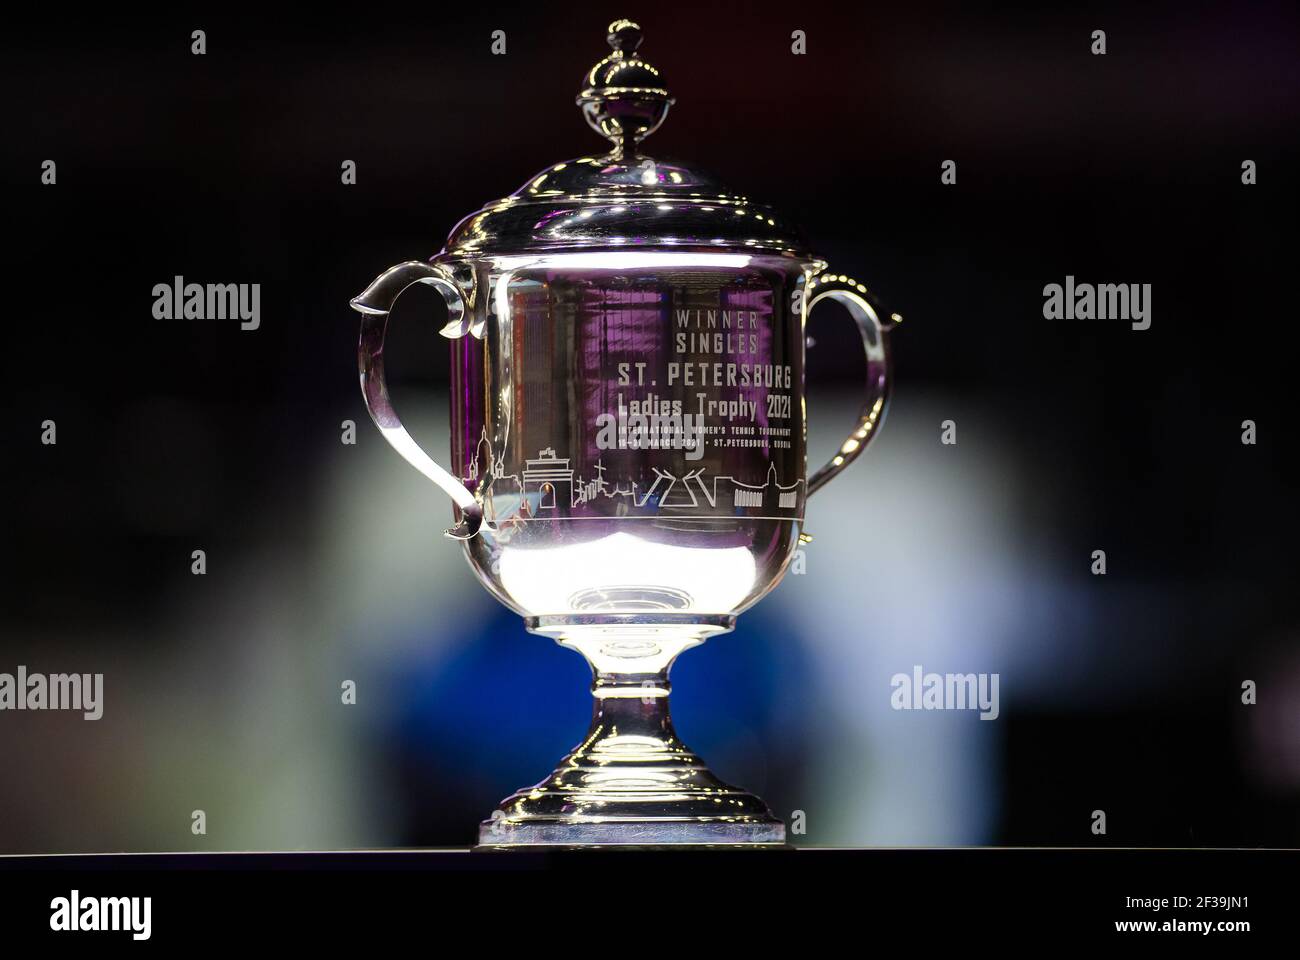 Singles Winners Trophy at the 2021 St Petersburg Ladies Trophy, WTA 500  tennis tournament on March